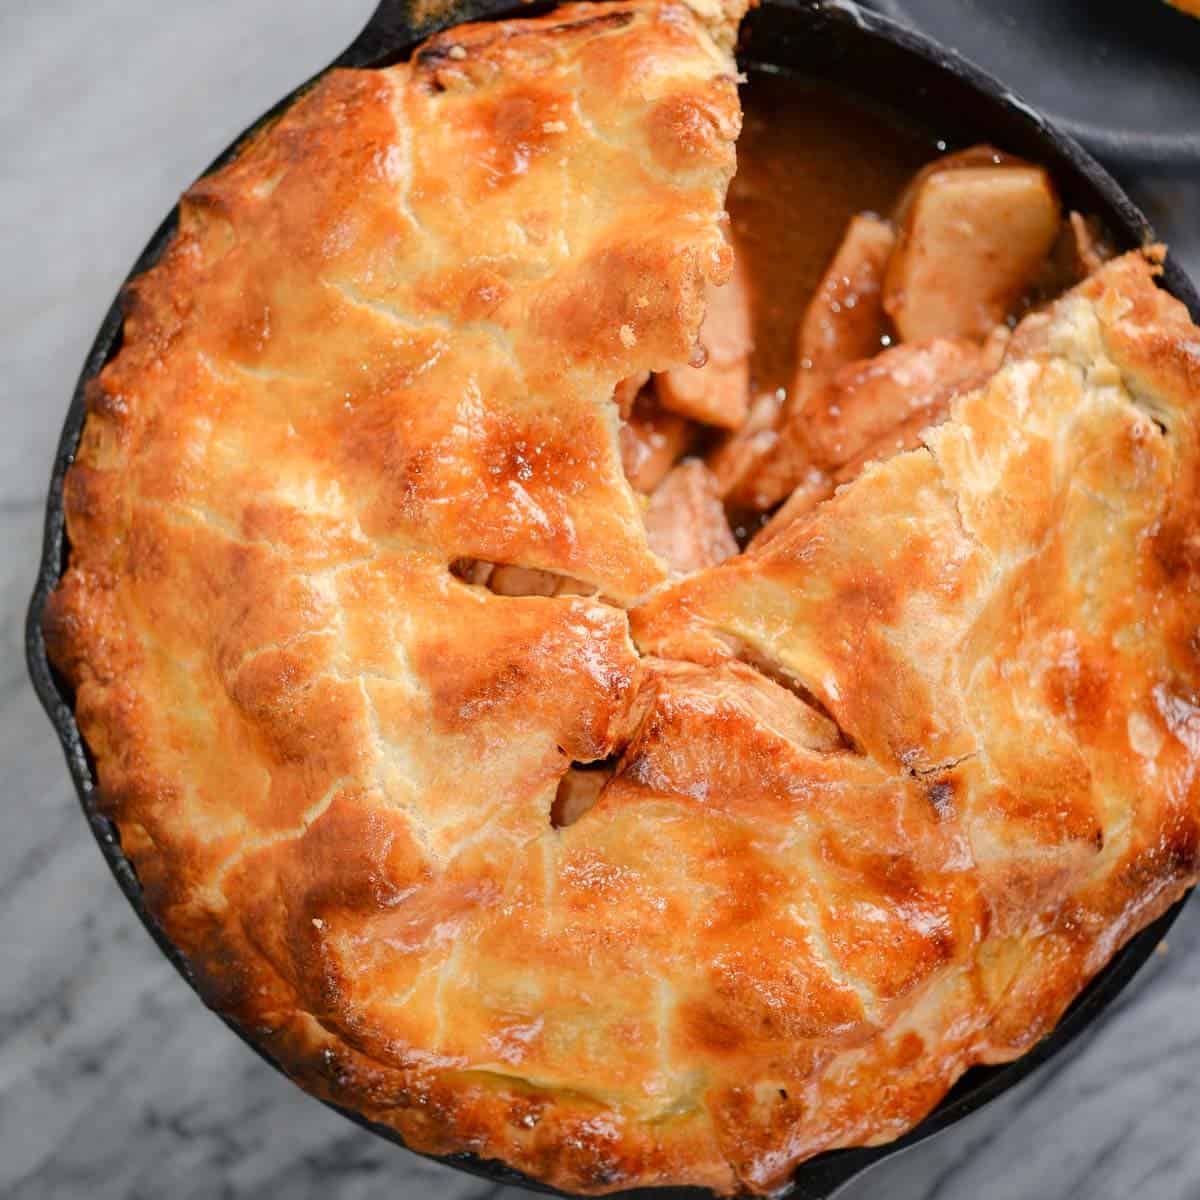 apple pie baked in a cast iron pan with a slice cut out